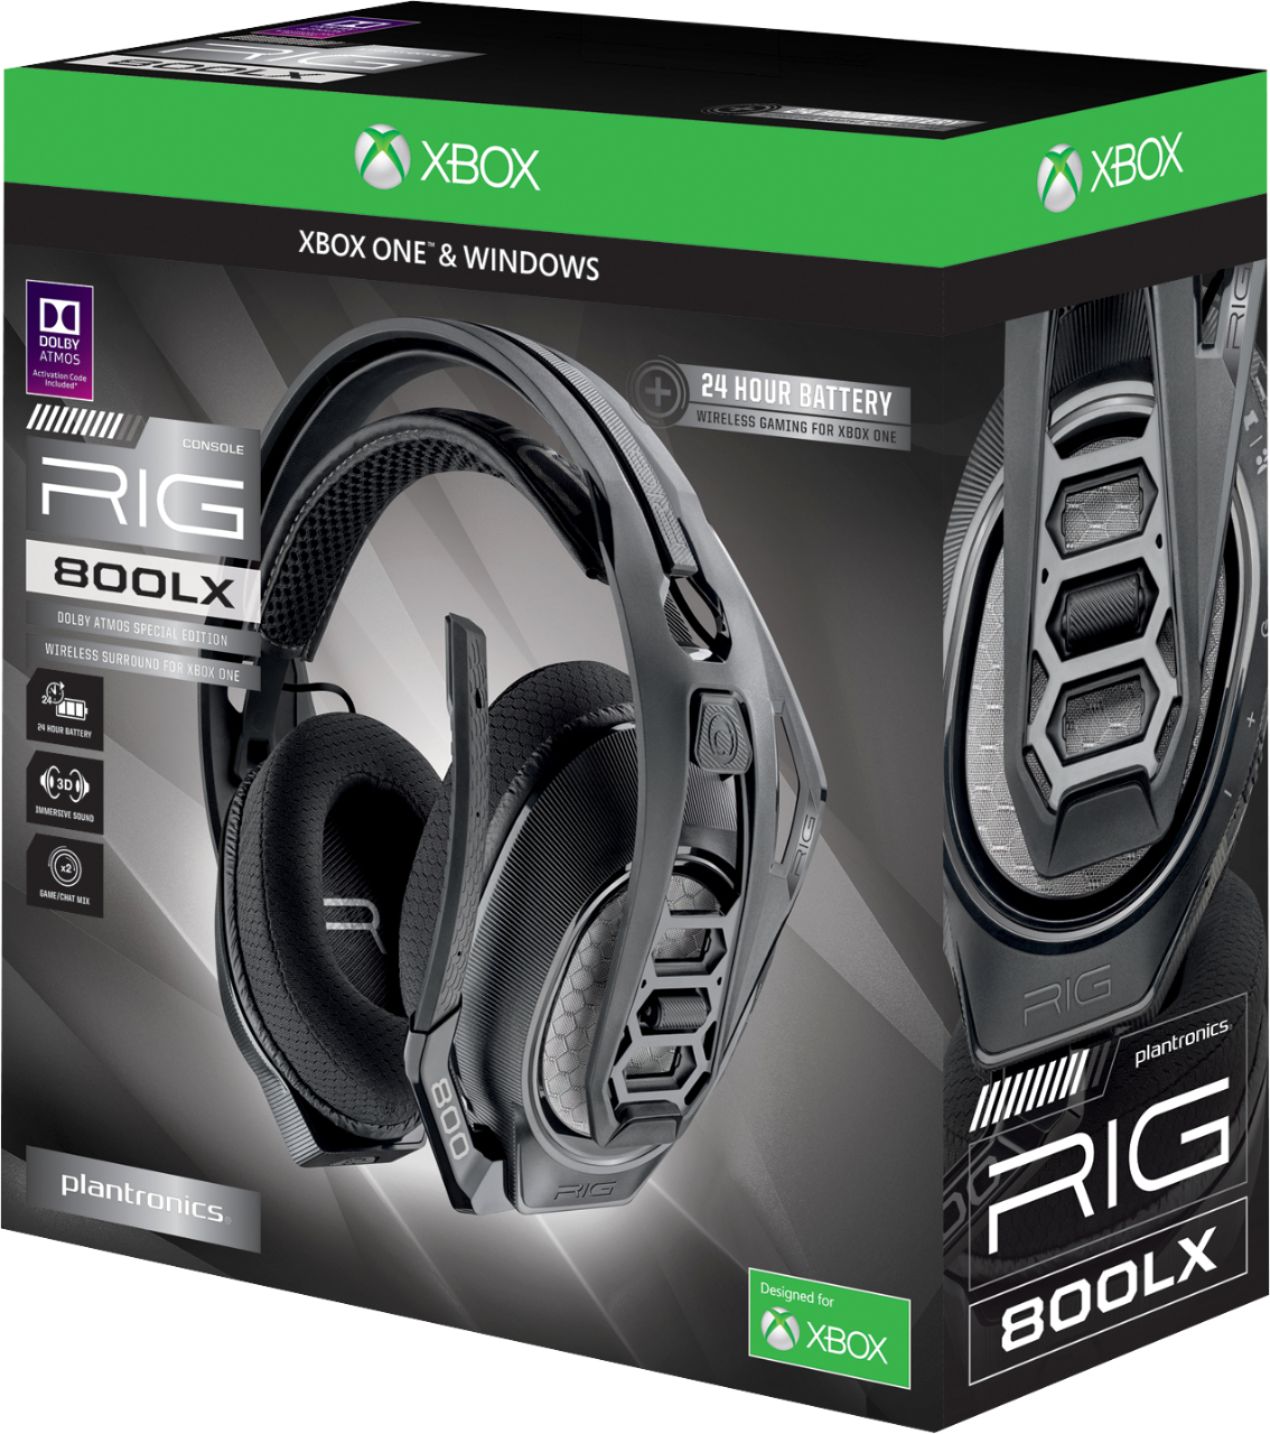 rig 800lx wireless stereo gaming headset